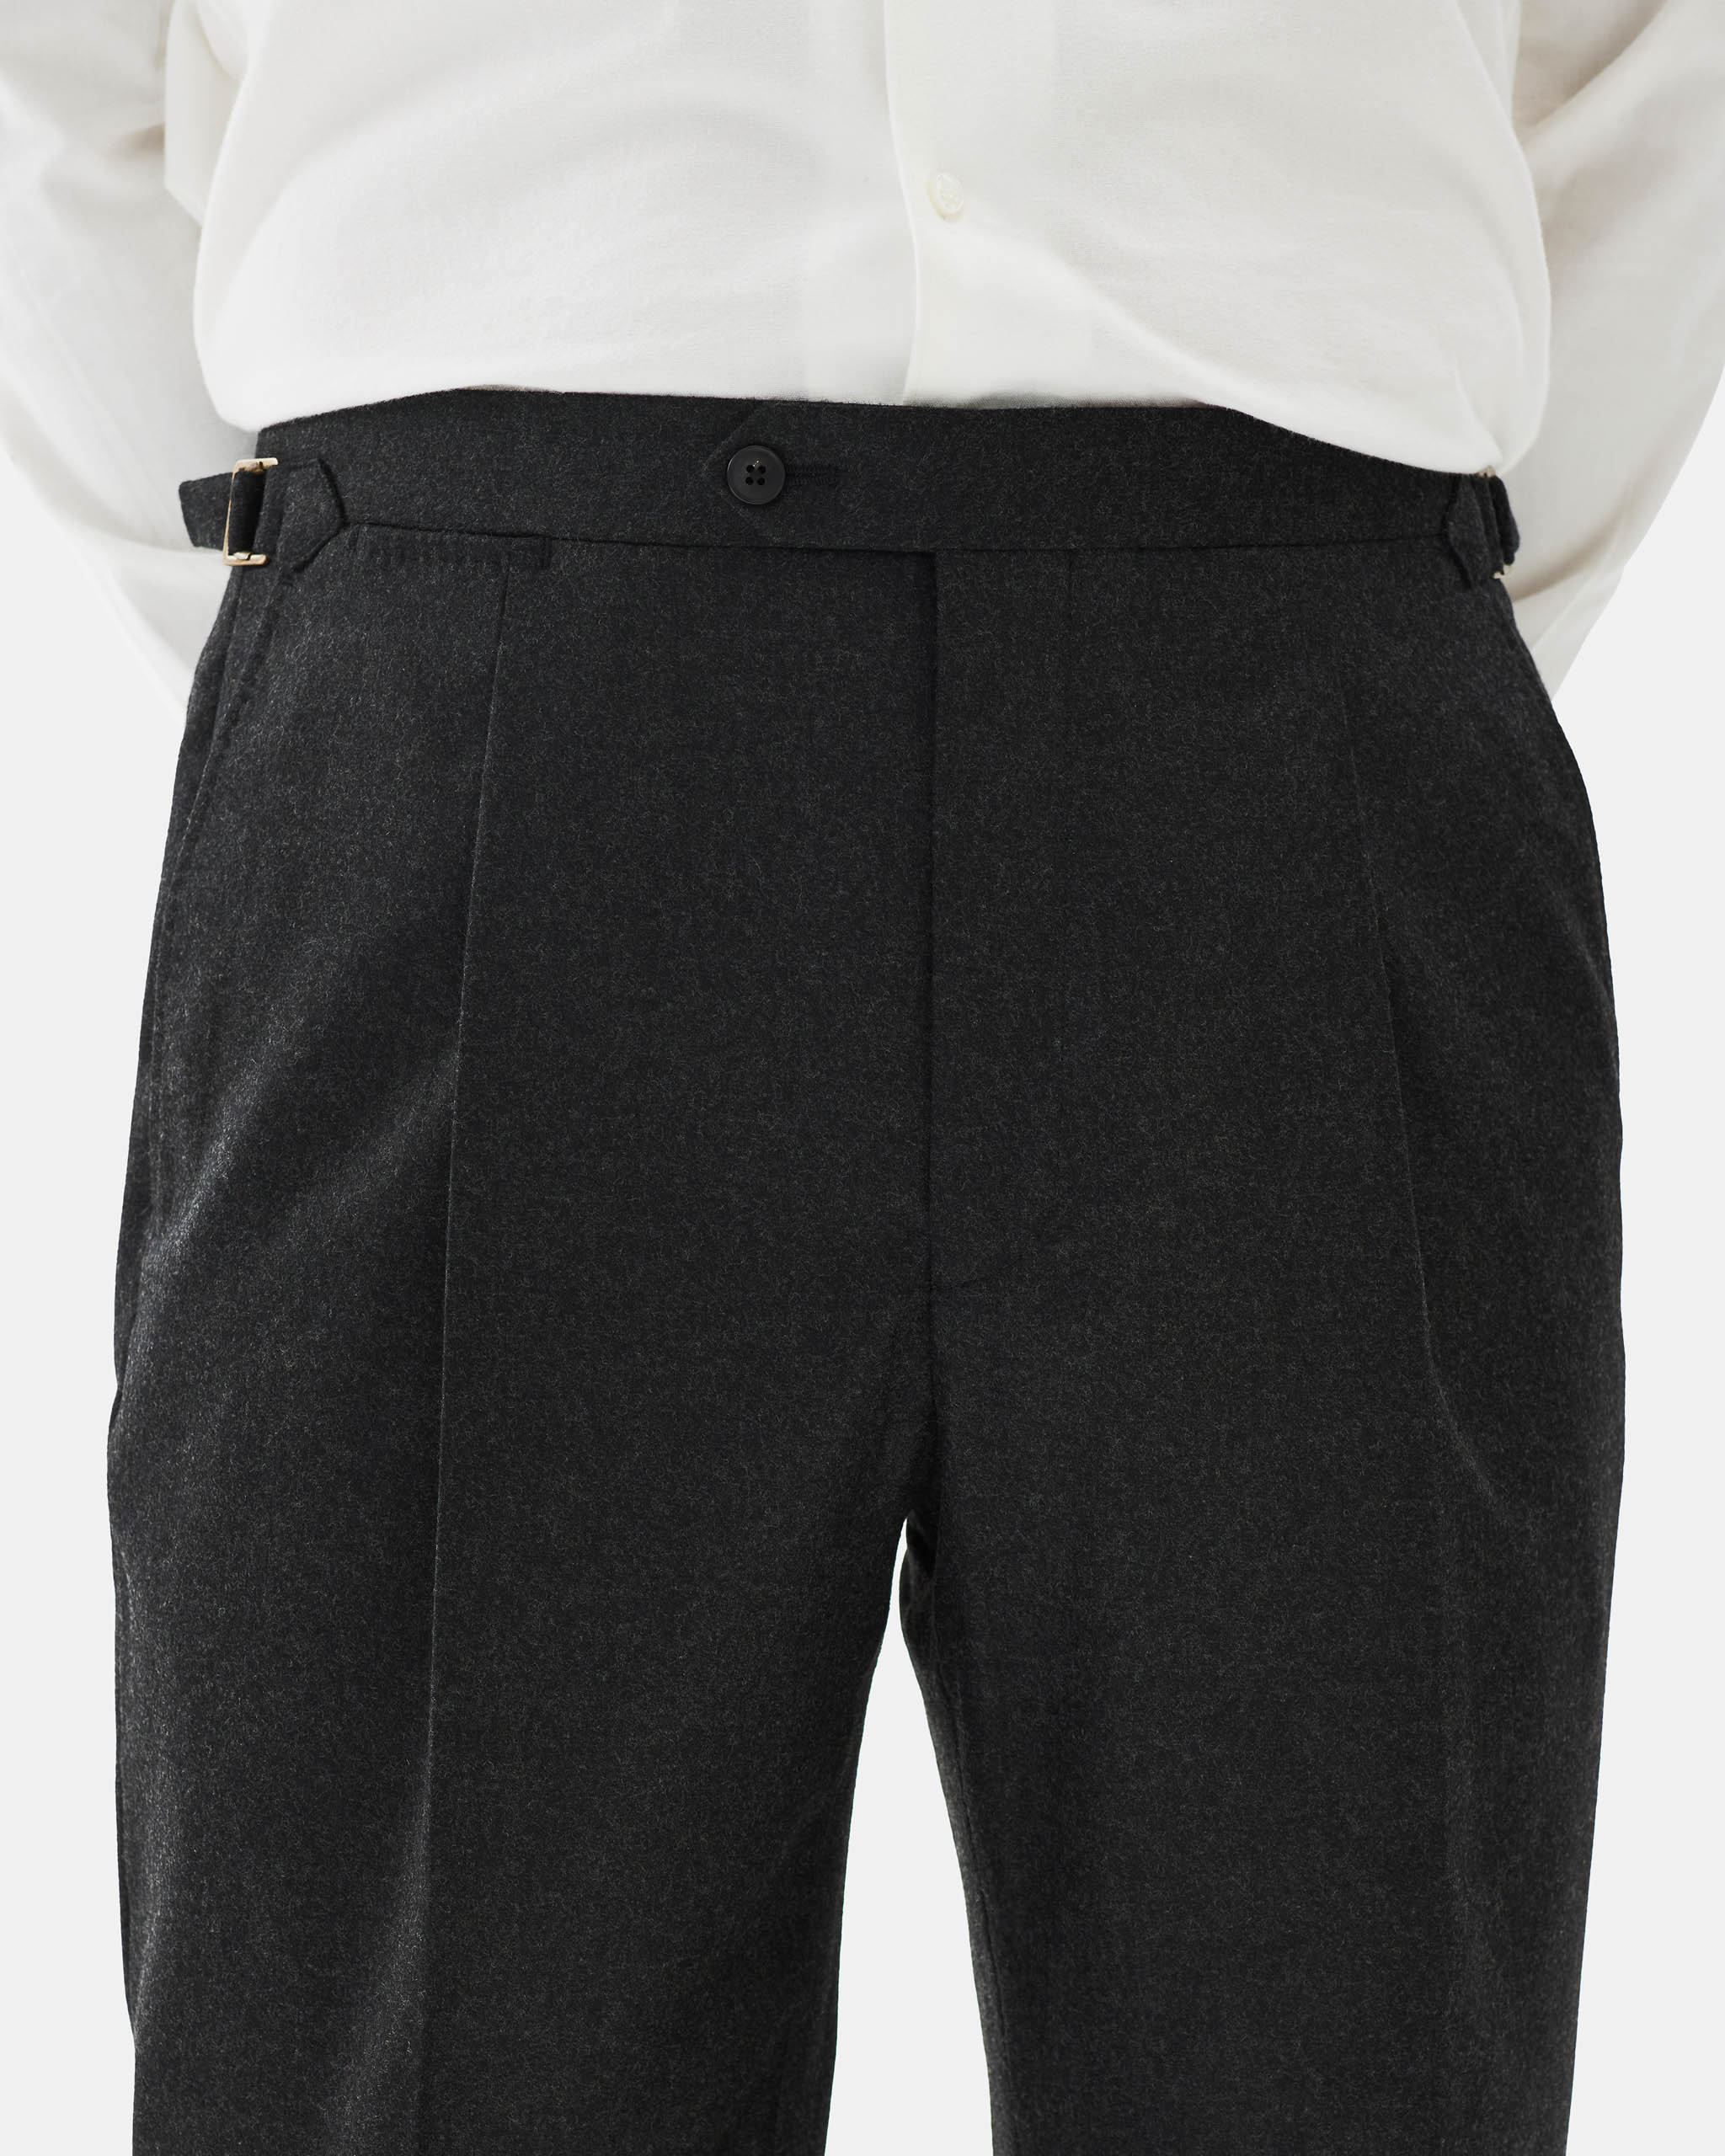 Trousers flannel wool & cashmere charcoal image 3